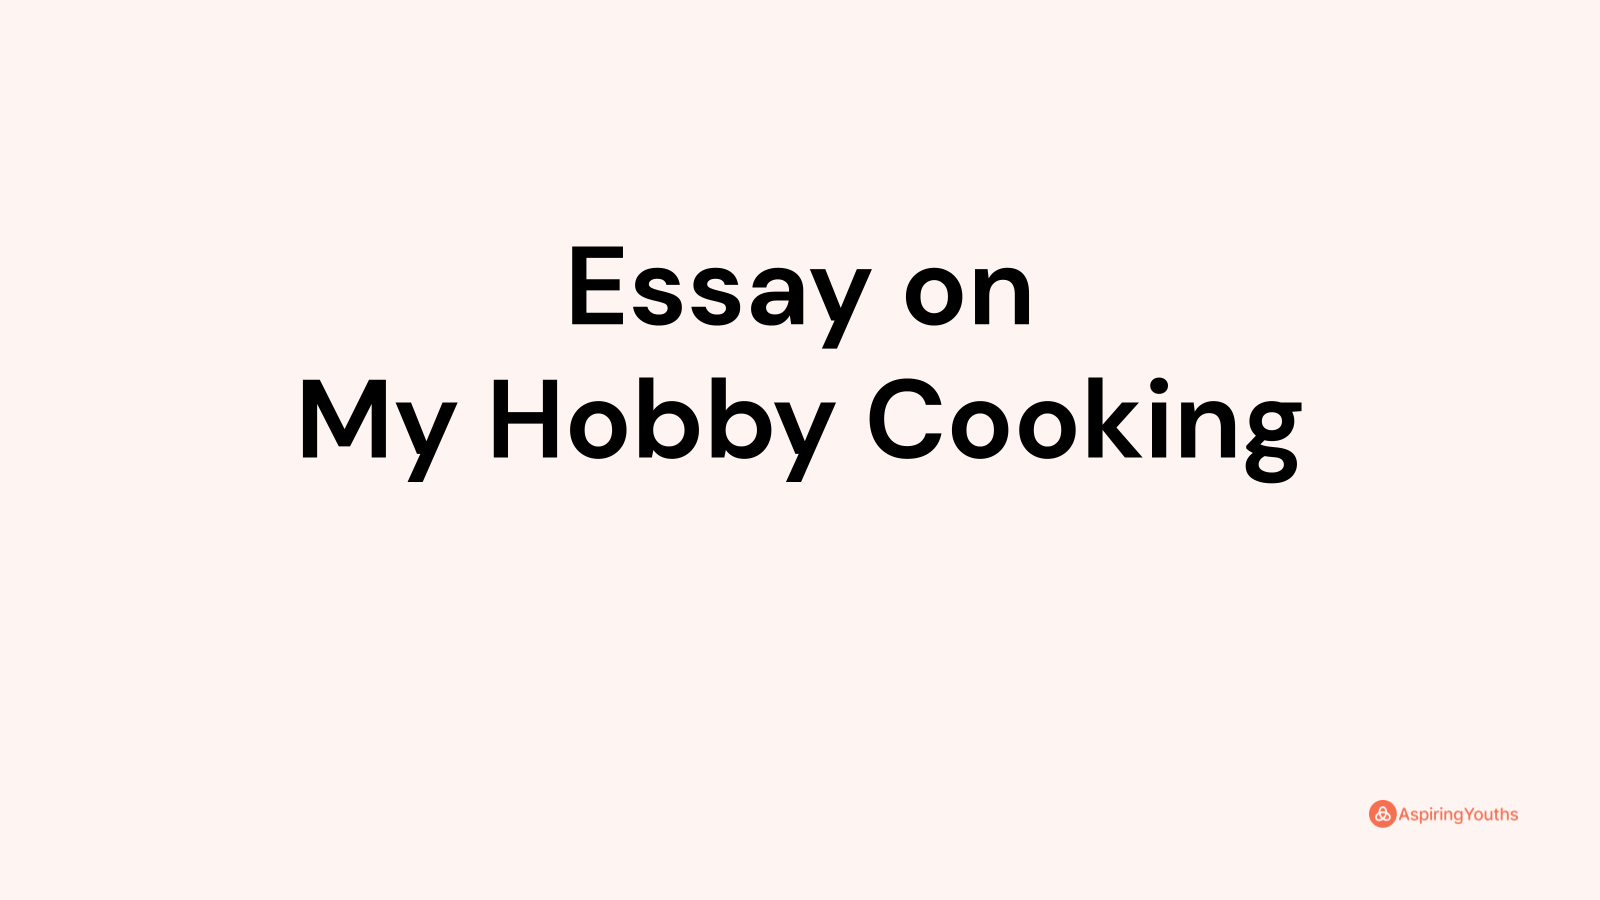 Essay on My Hobby Cooking